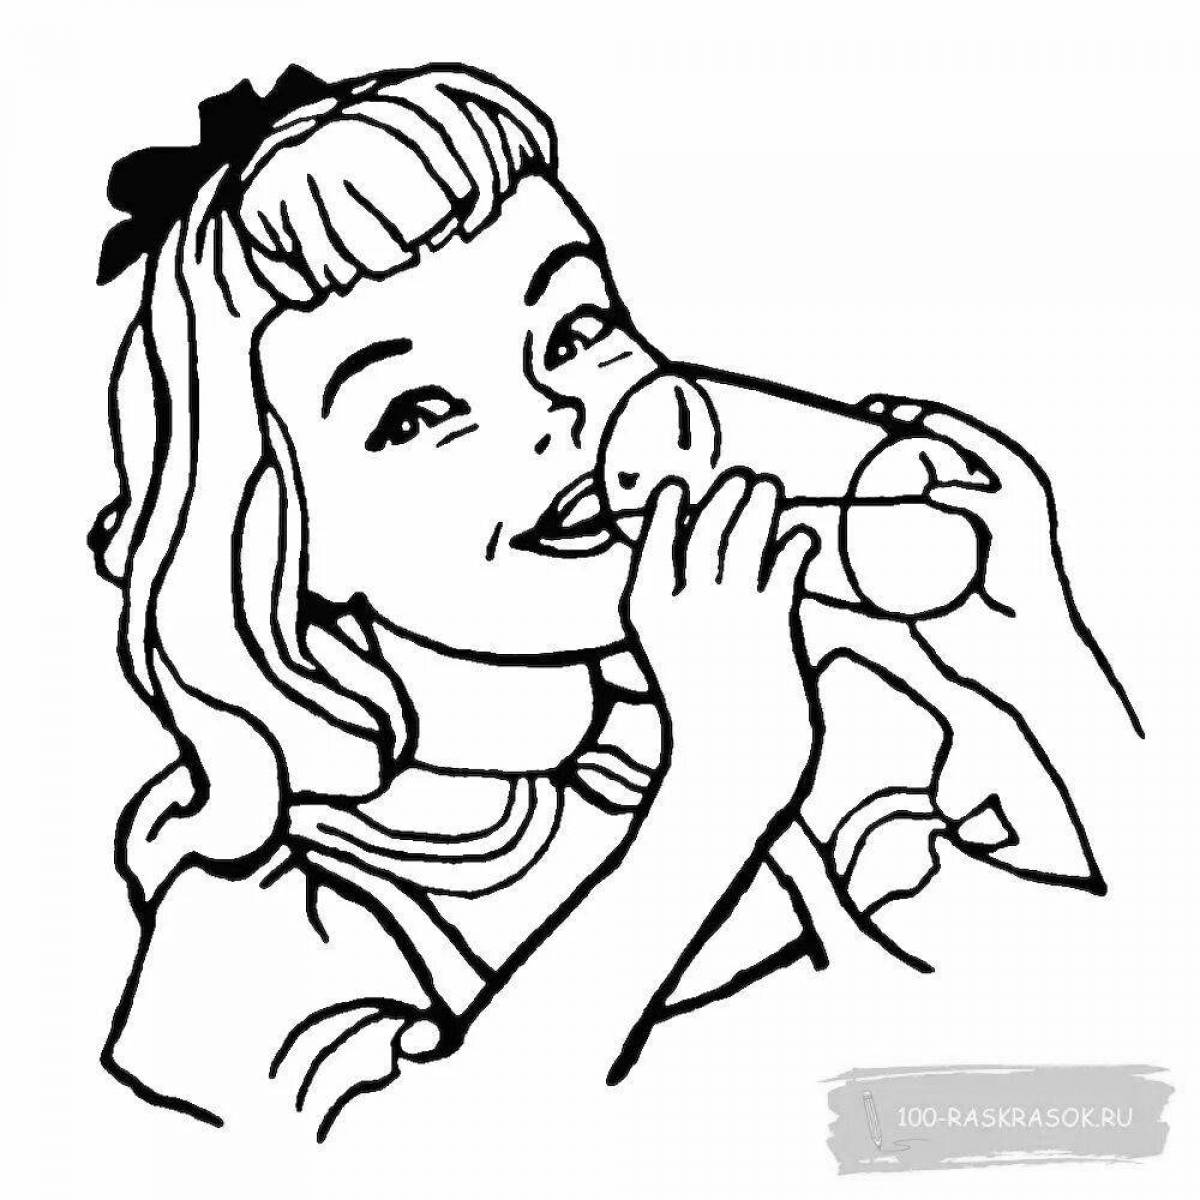 Soda drink coloring page for girls